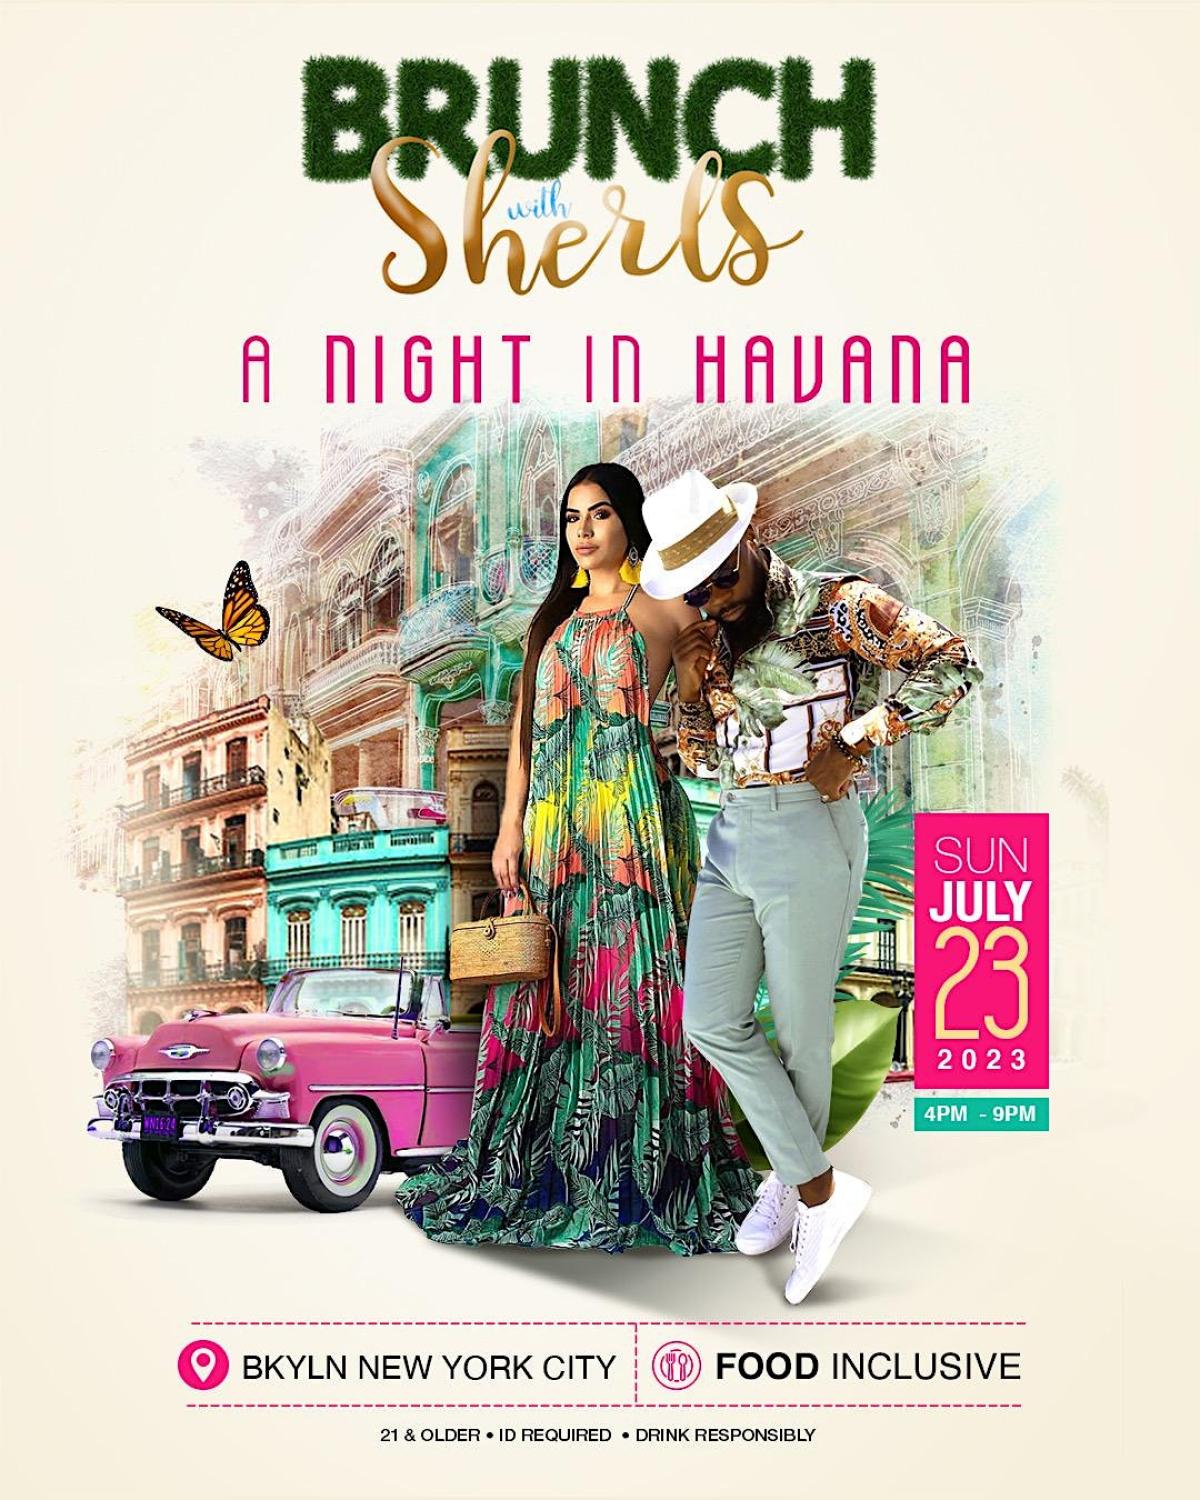 Brunch with Sherls: A Night in Havana flyer or graphic.